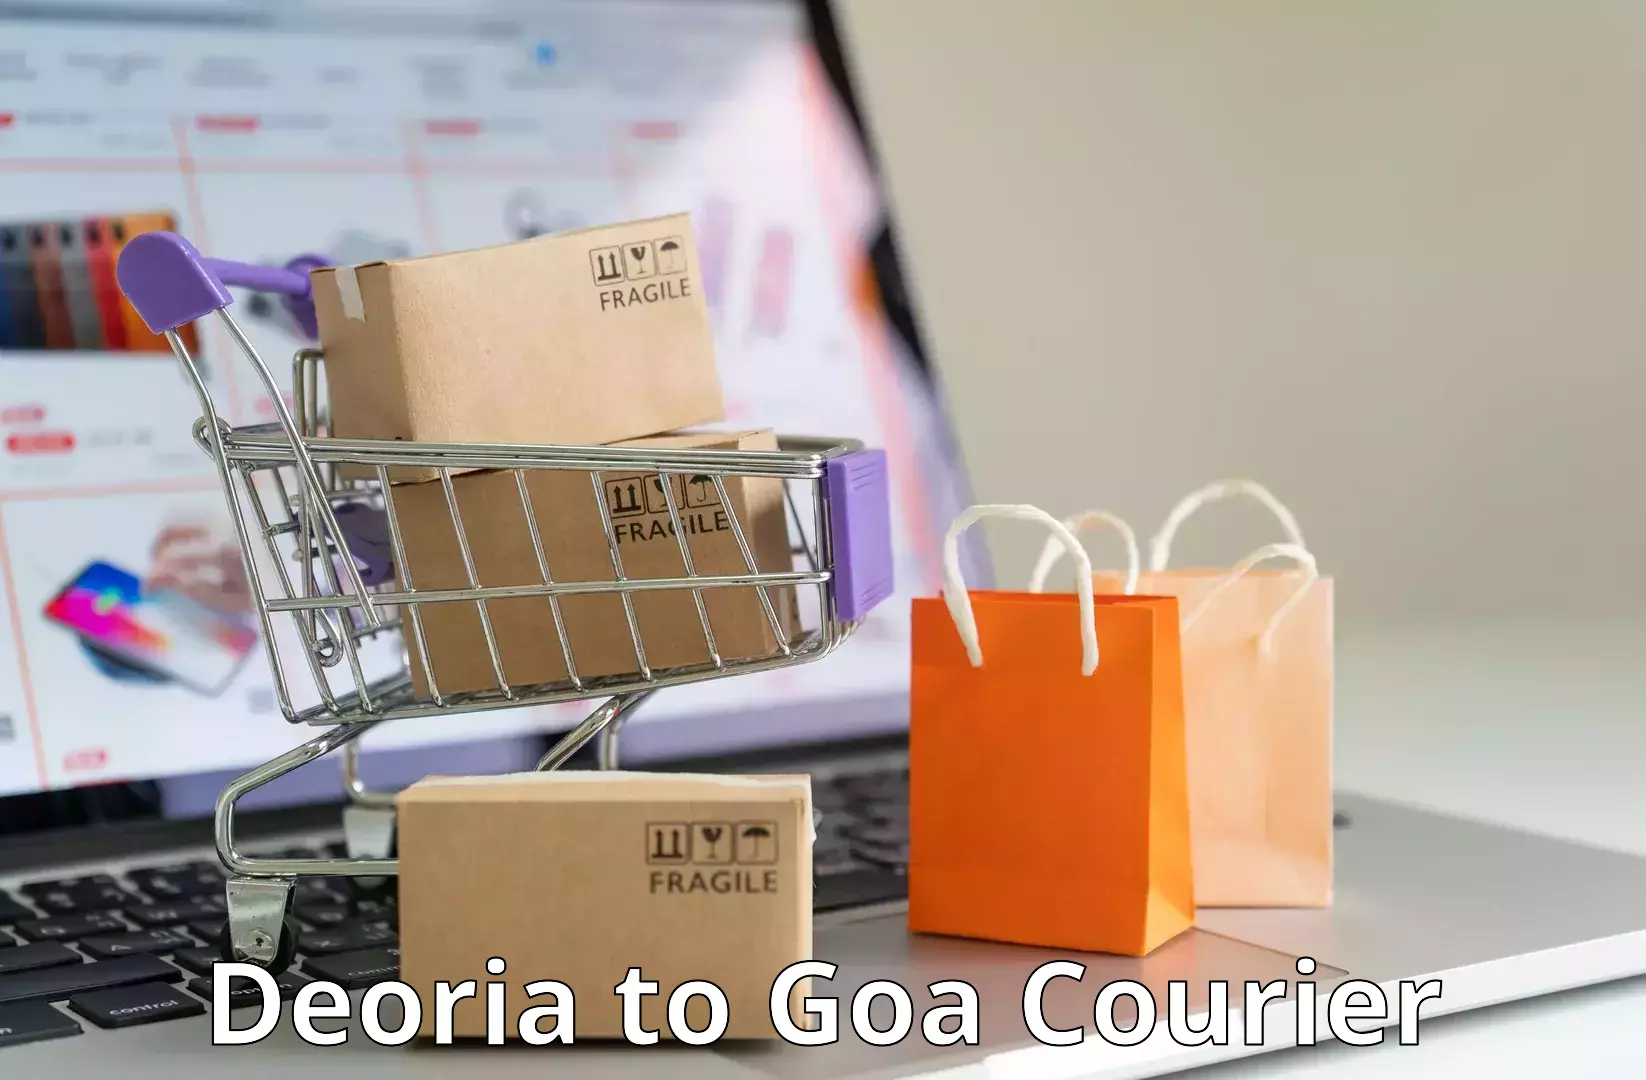 Cost-effective courier options Deoria to Panaji